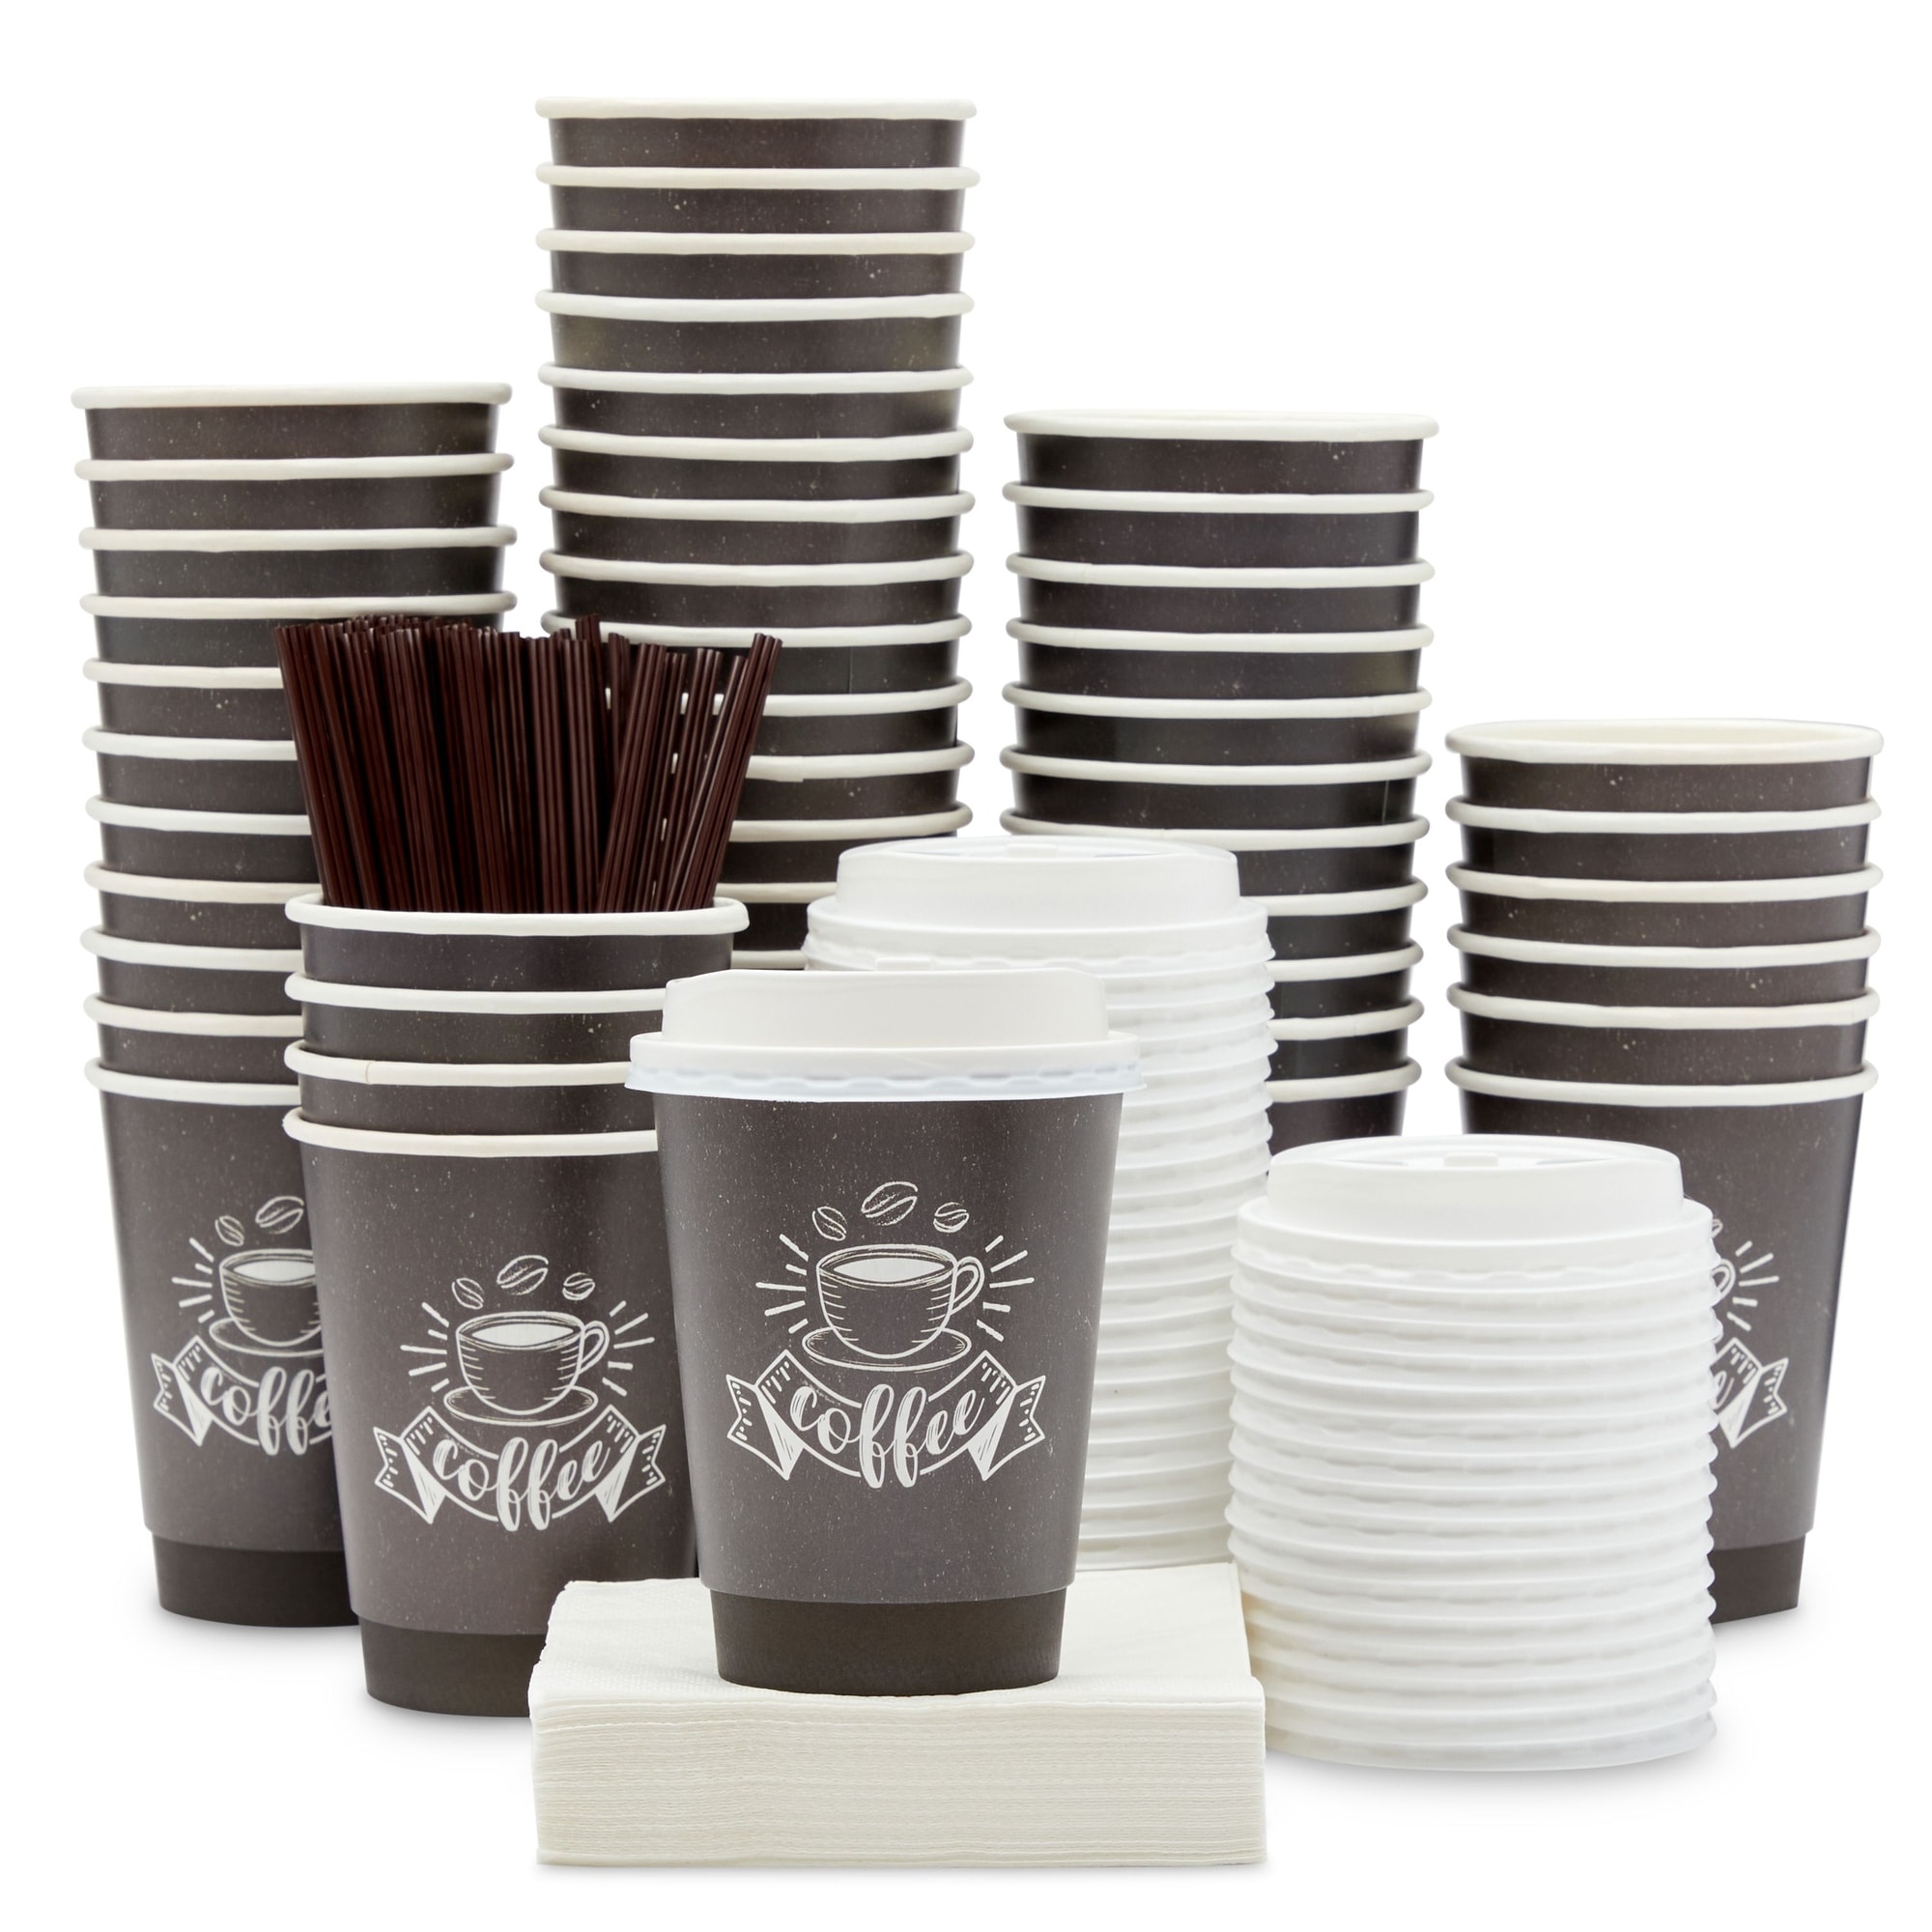 https://ak1.ostkcdn.com/images/products/is/images/direct/a58ead53ad30dc8b379eecab9e4a0b1c880c250e/50-Pack-12-oz-Disposable-Paper-Coffee-Cups-with-Lids%2C-Stir-Straws%2C-and-Napkins-for-Hot-Drinks-To-Go-%28Black%29.jpg